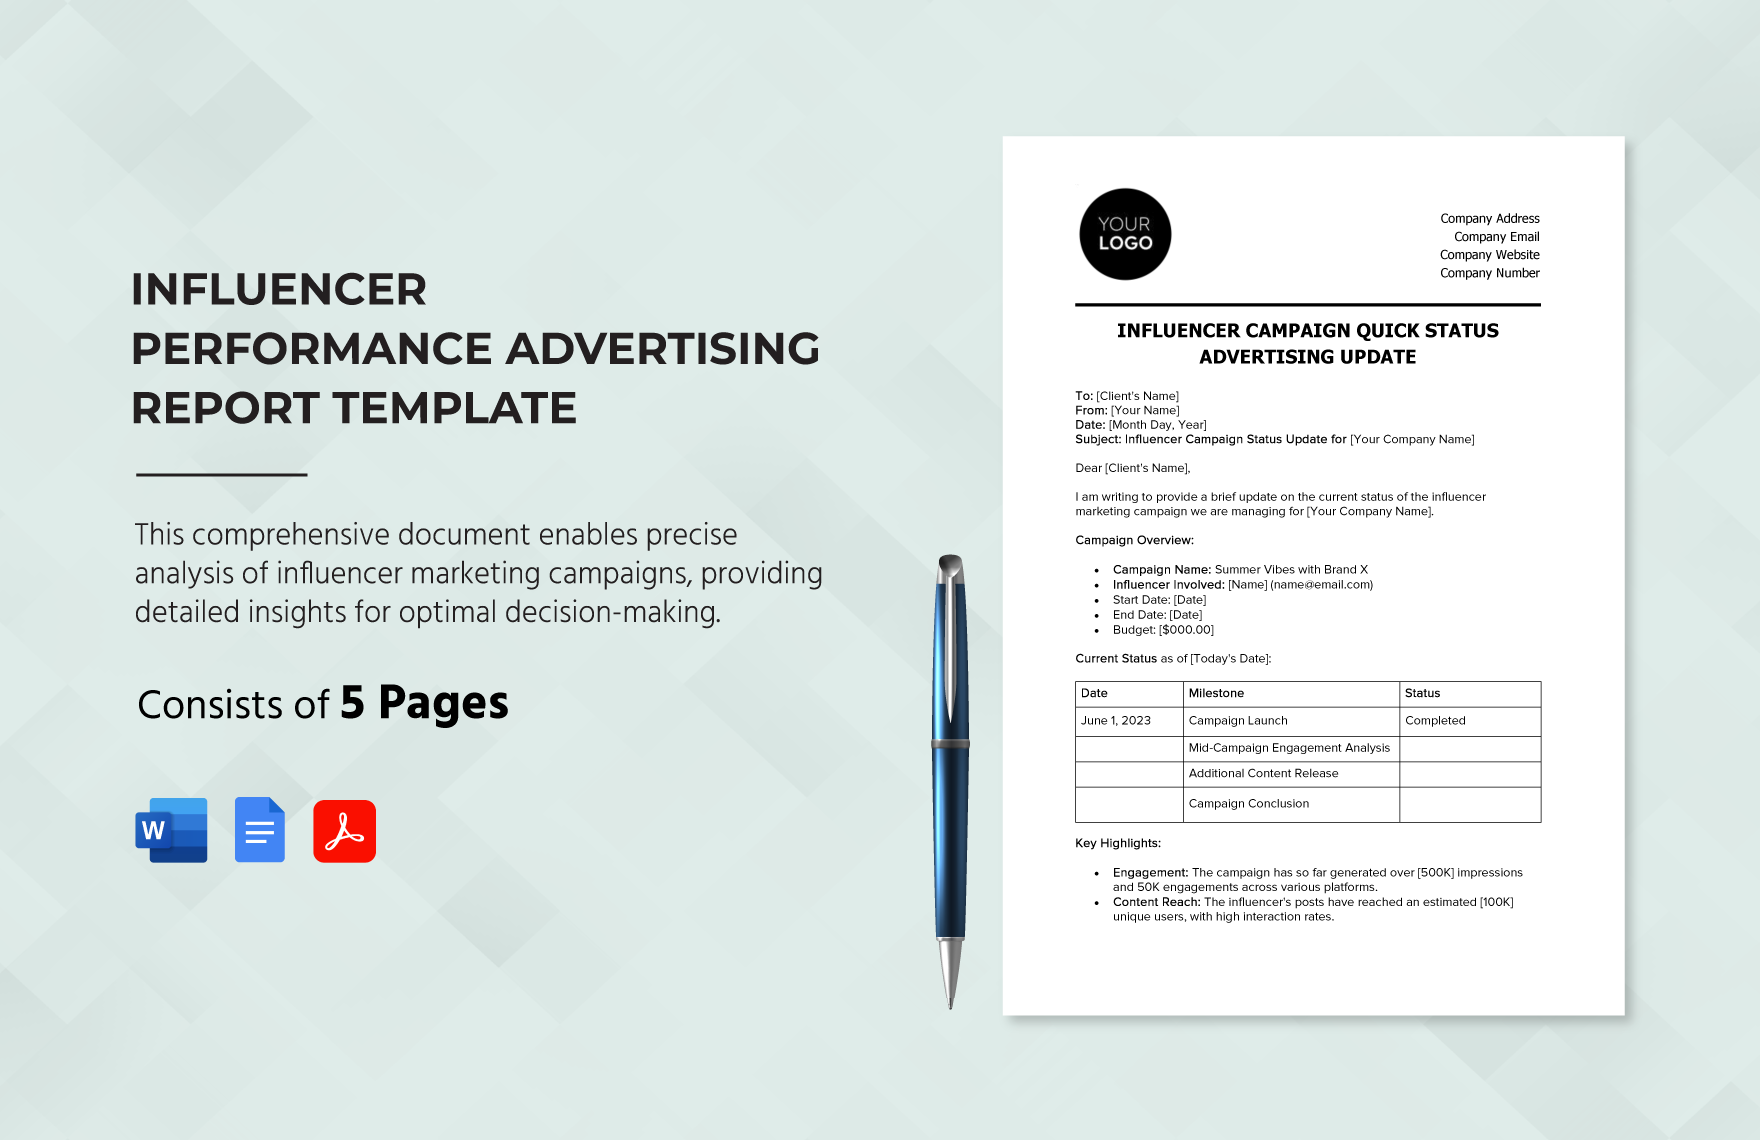 Influencer Performance Advertising Report Template in Word, Google Docs, PDF